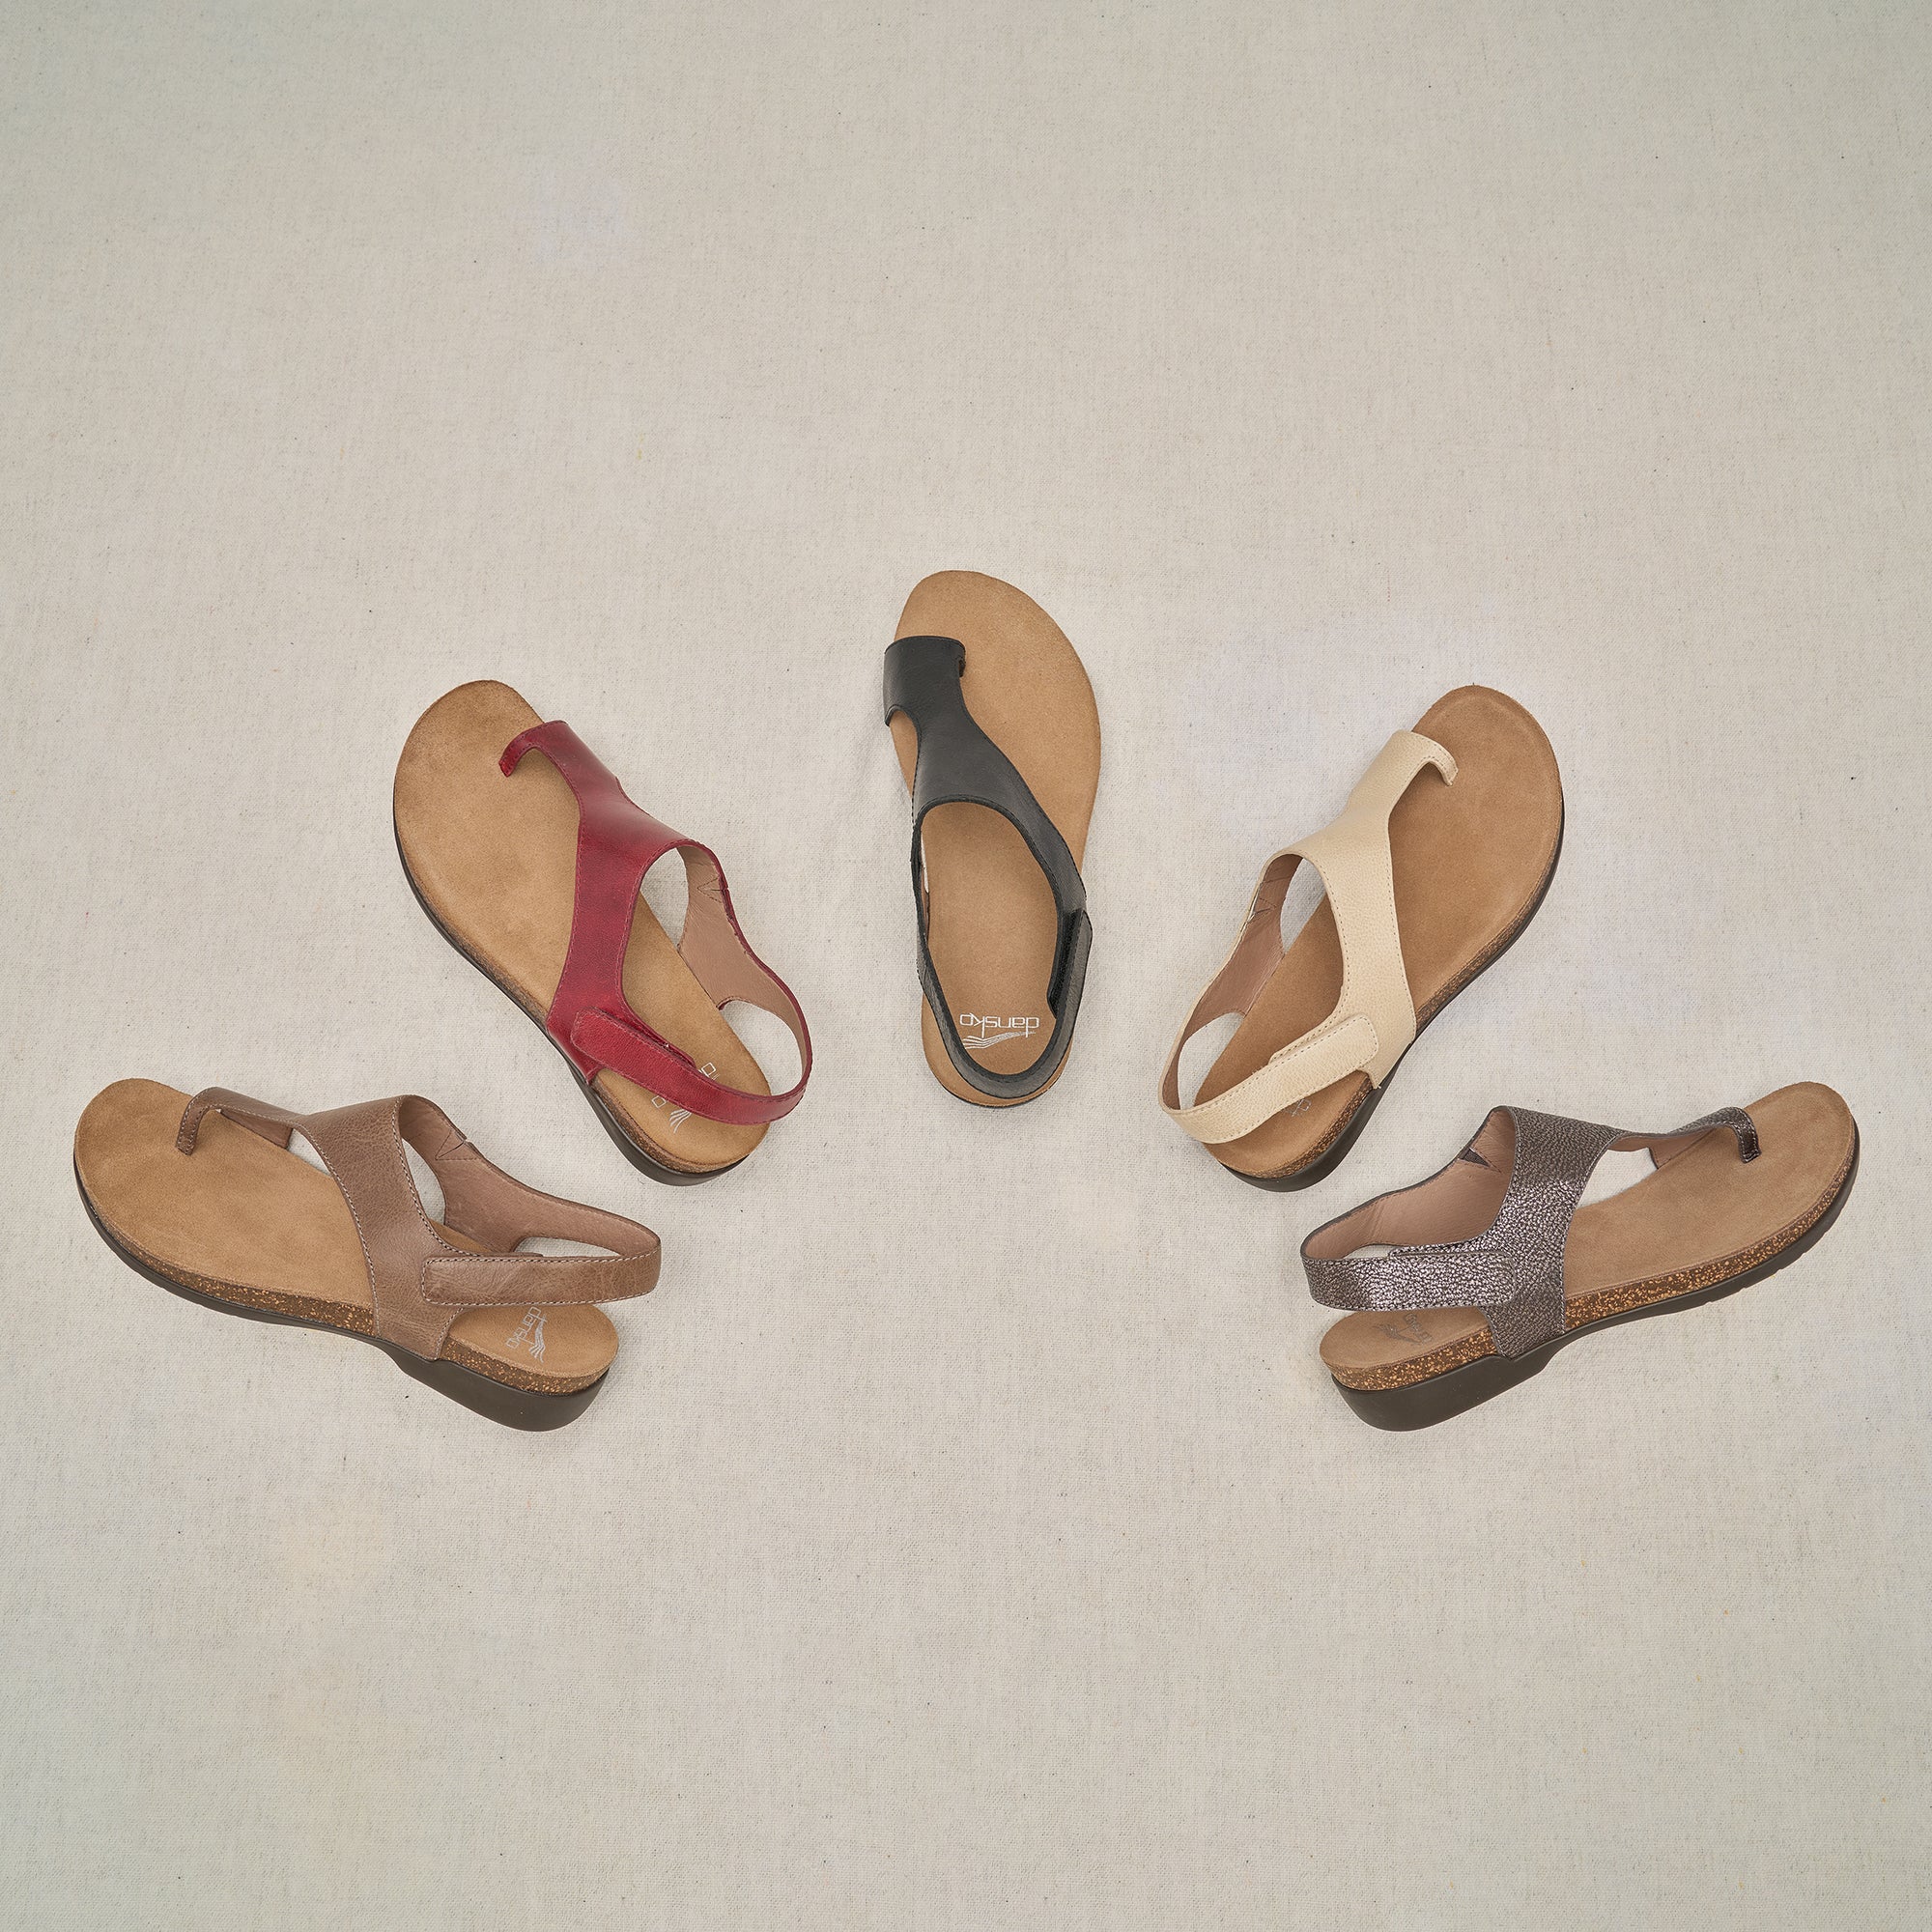 Five different colors of a flat, leather toe-post sandal.